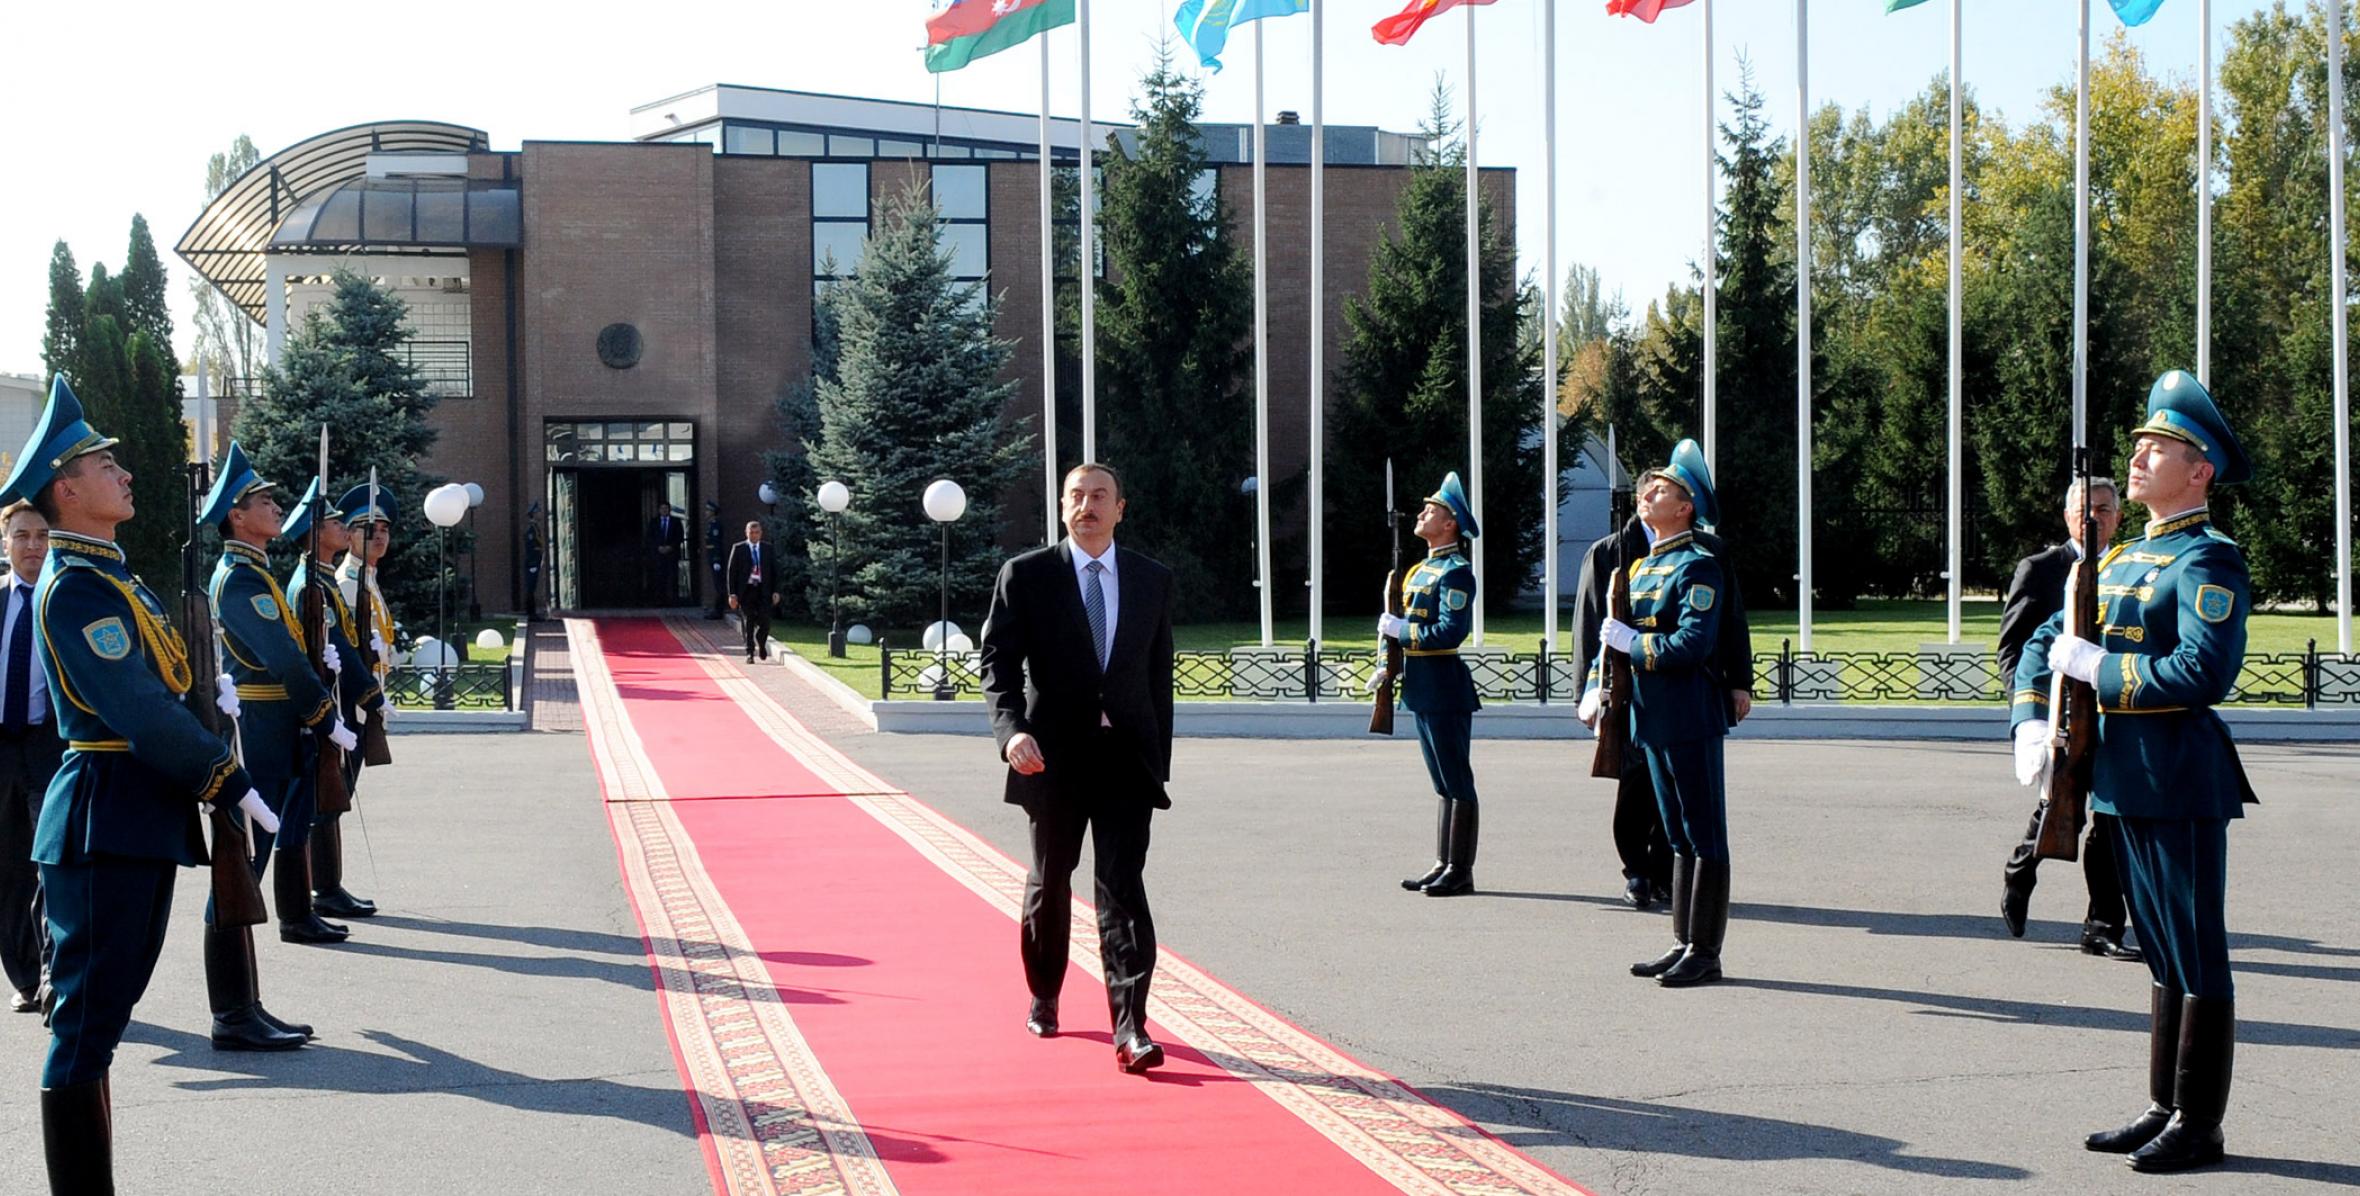 Ilham Aliyev’s official visit to Kazakhstan ended